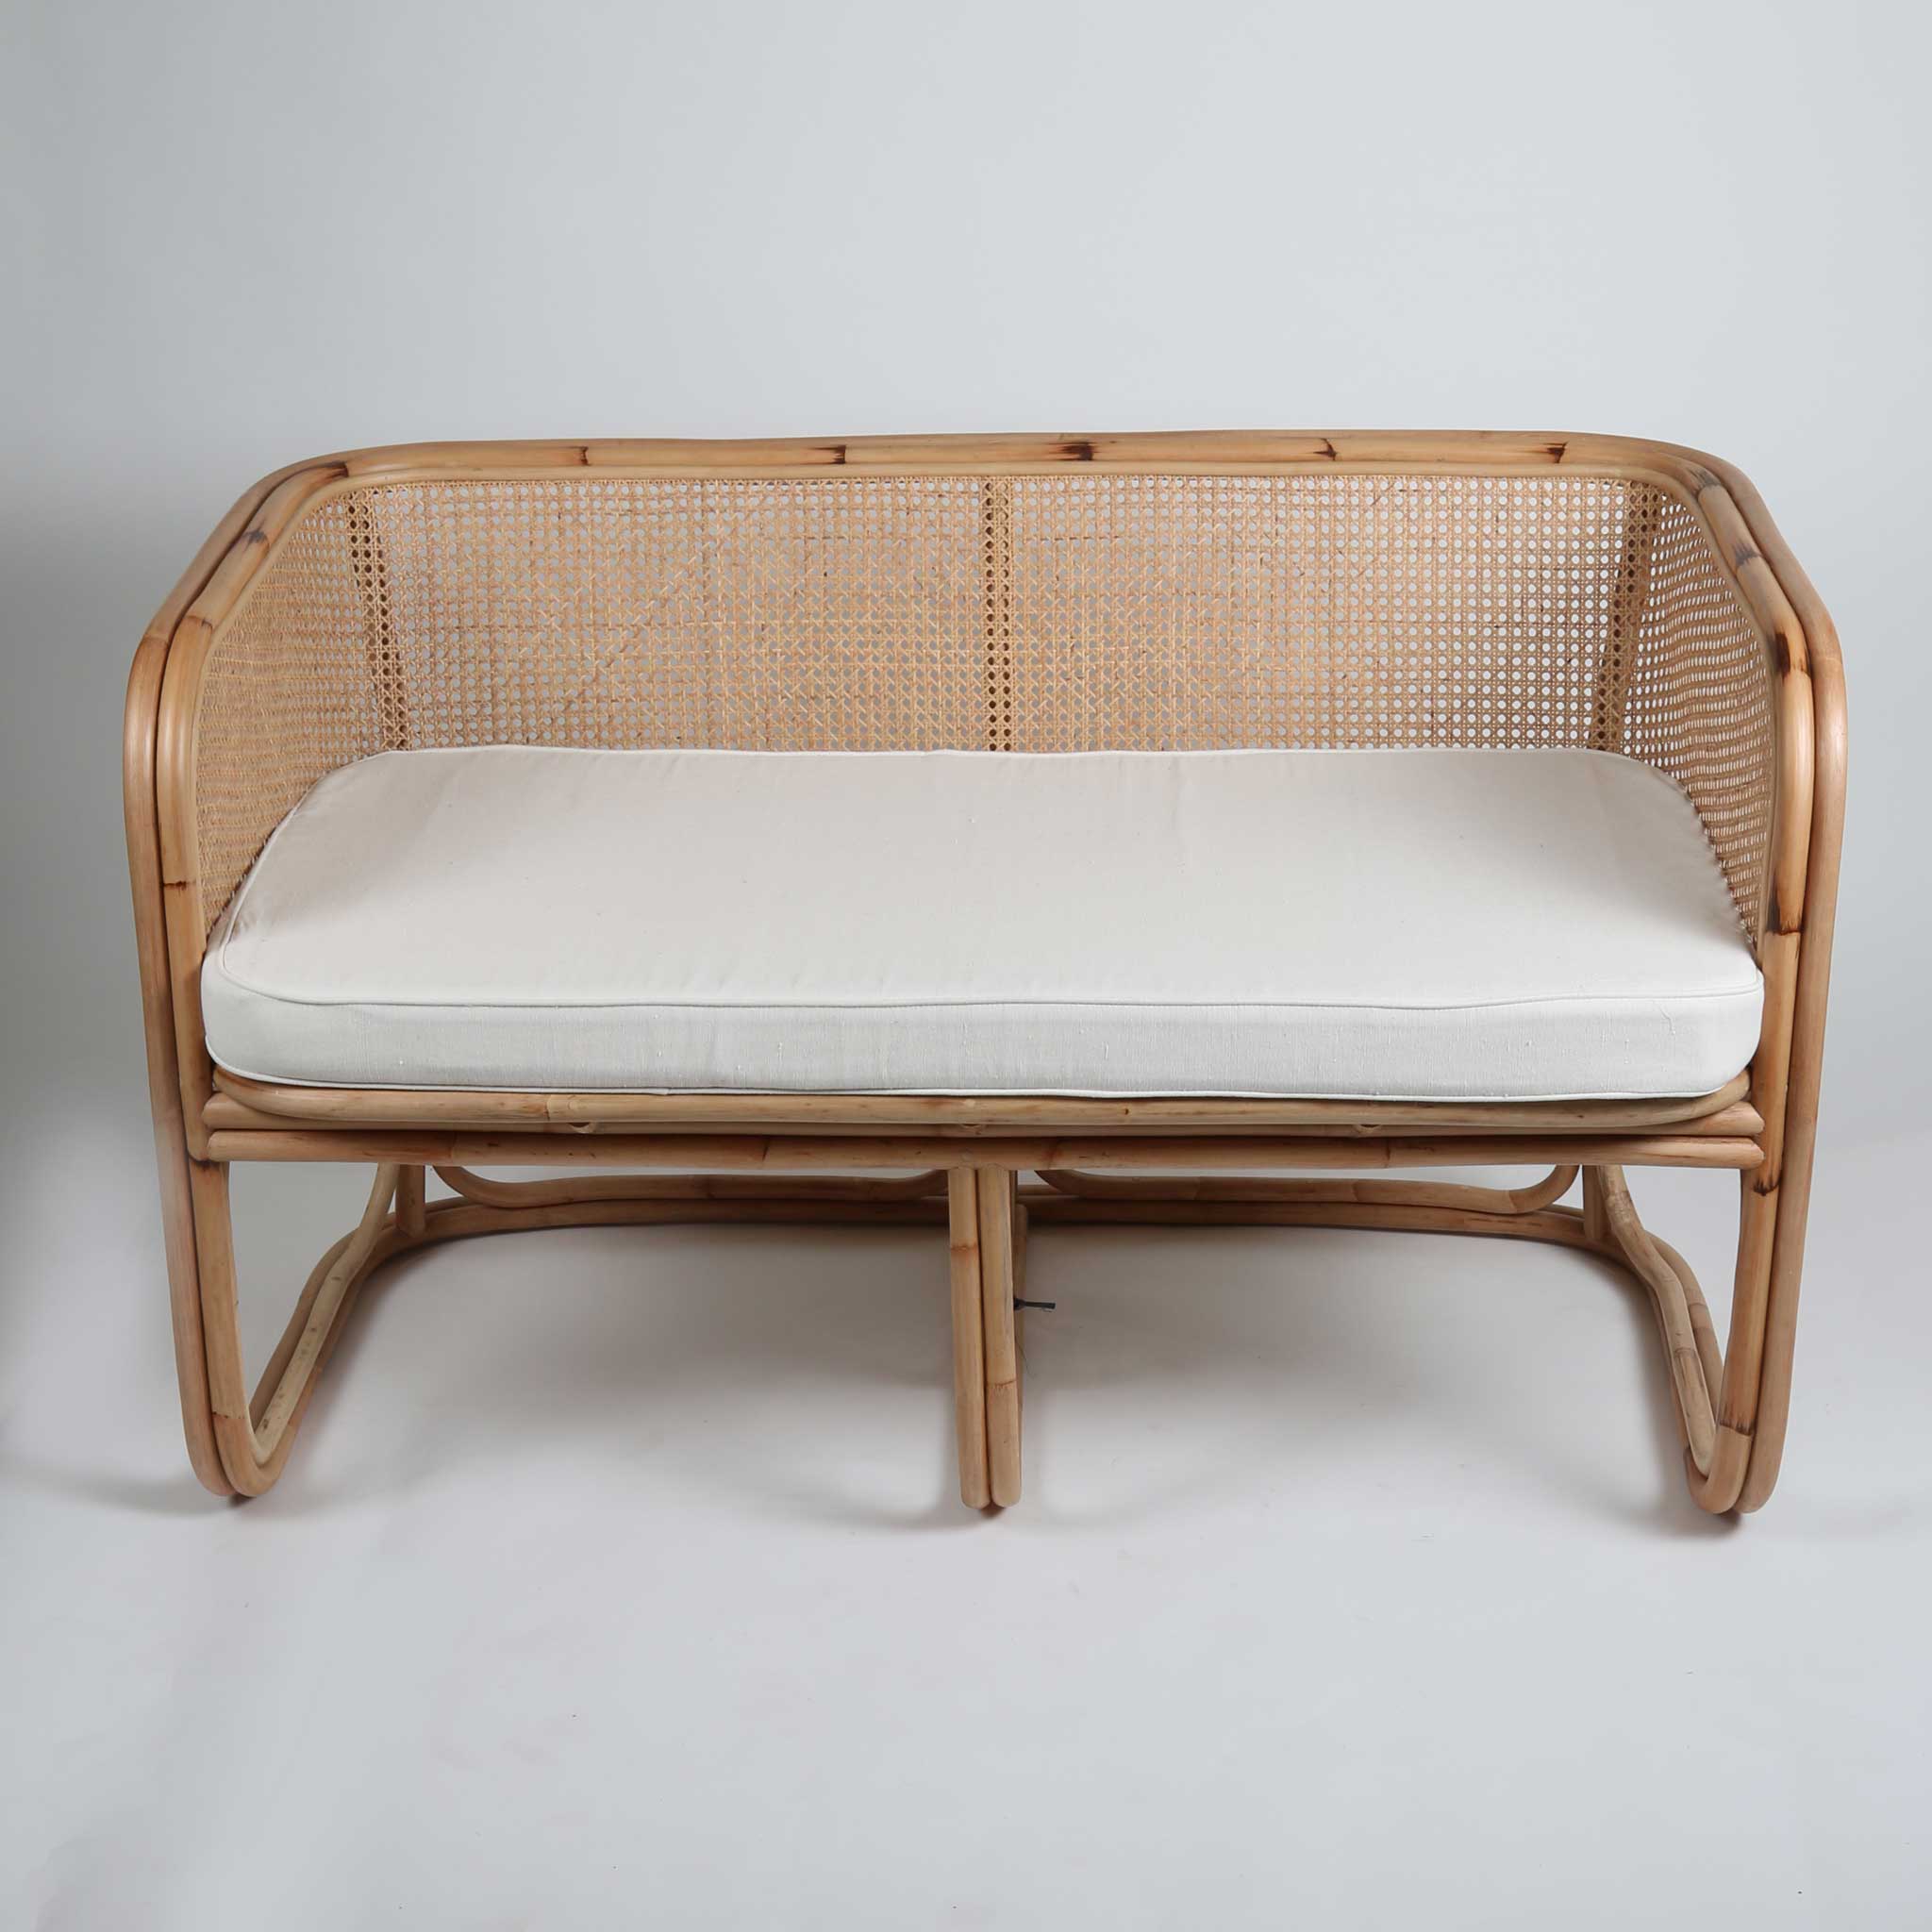 'Pak' Rattan Sofa with Chicken Weave Panelling